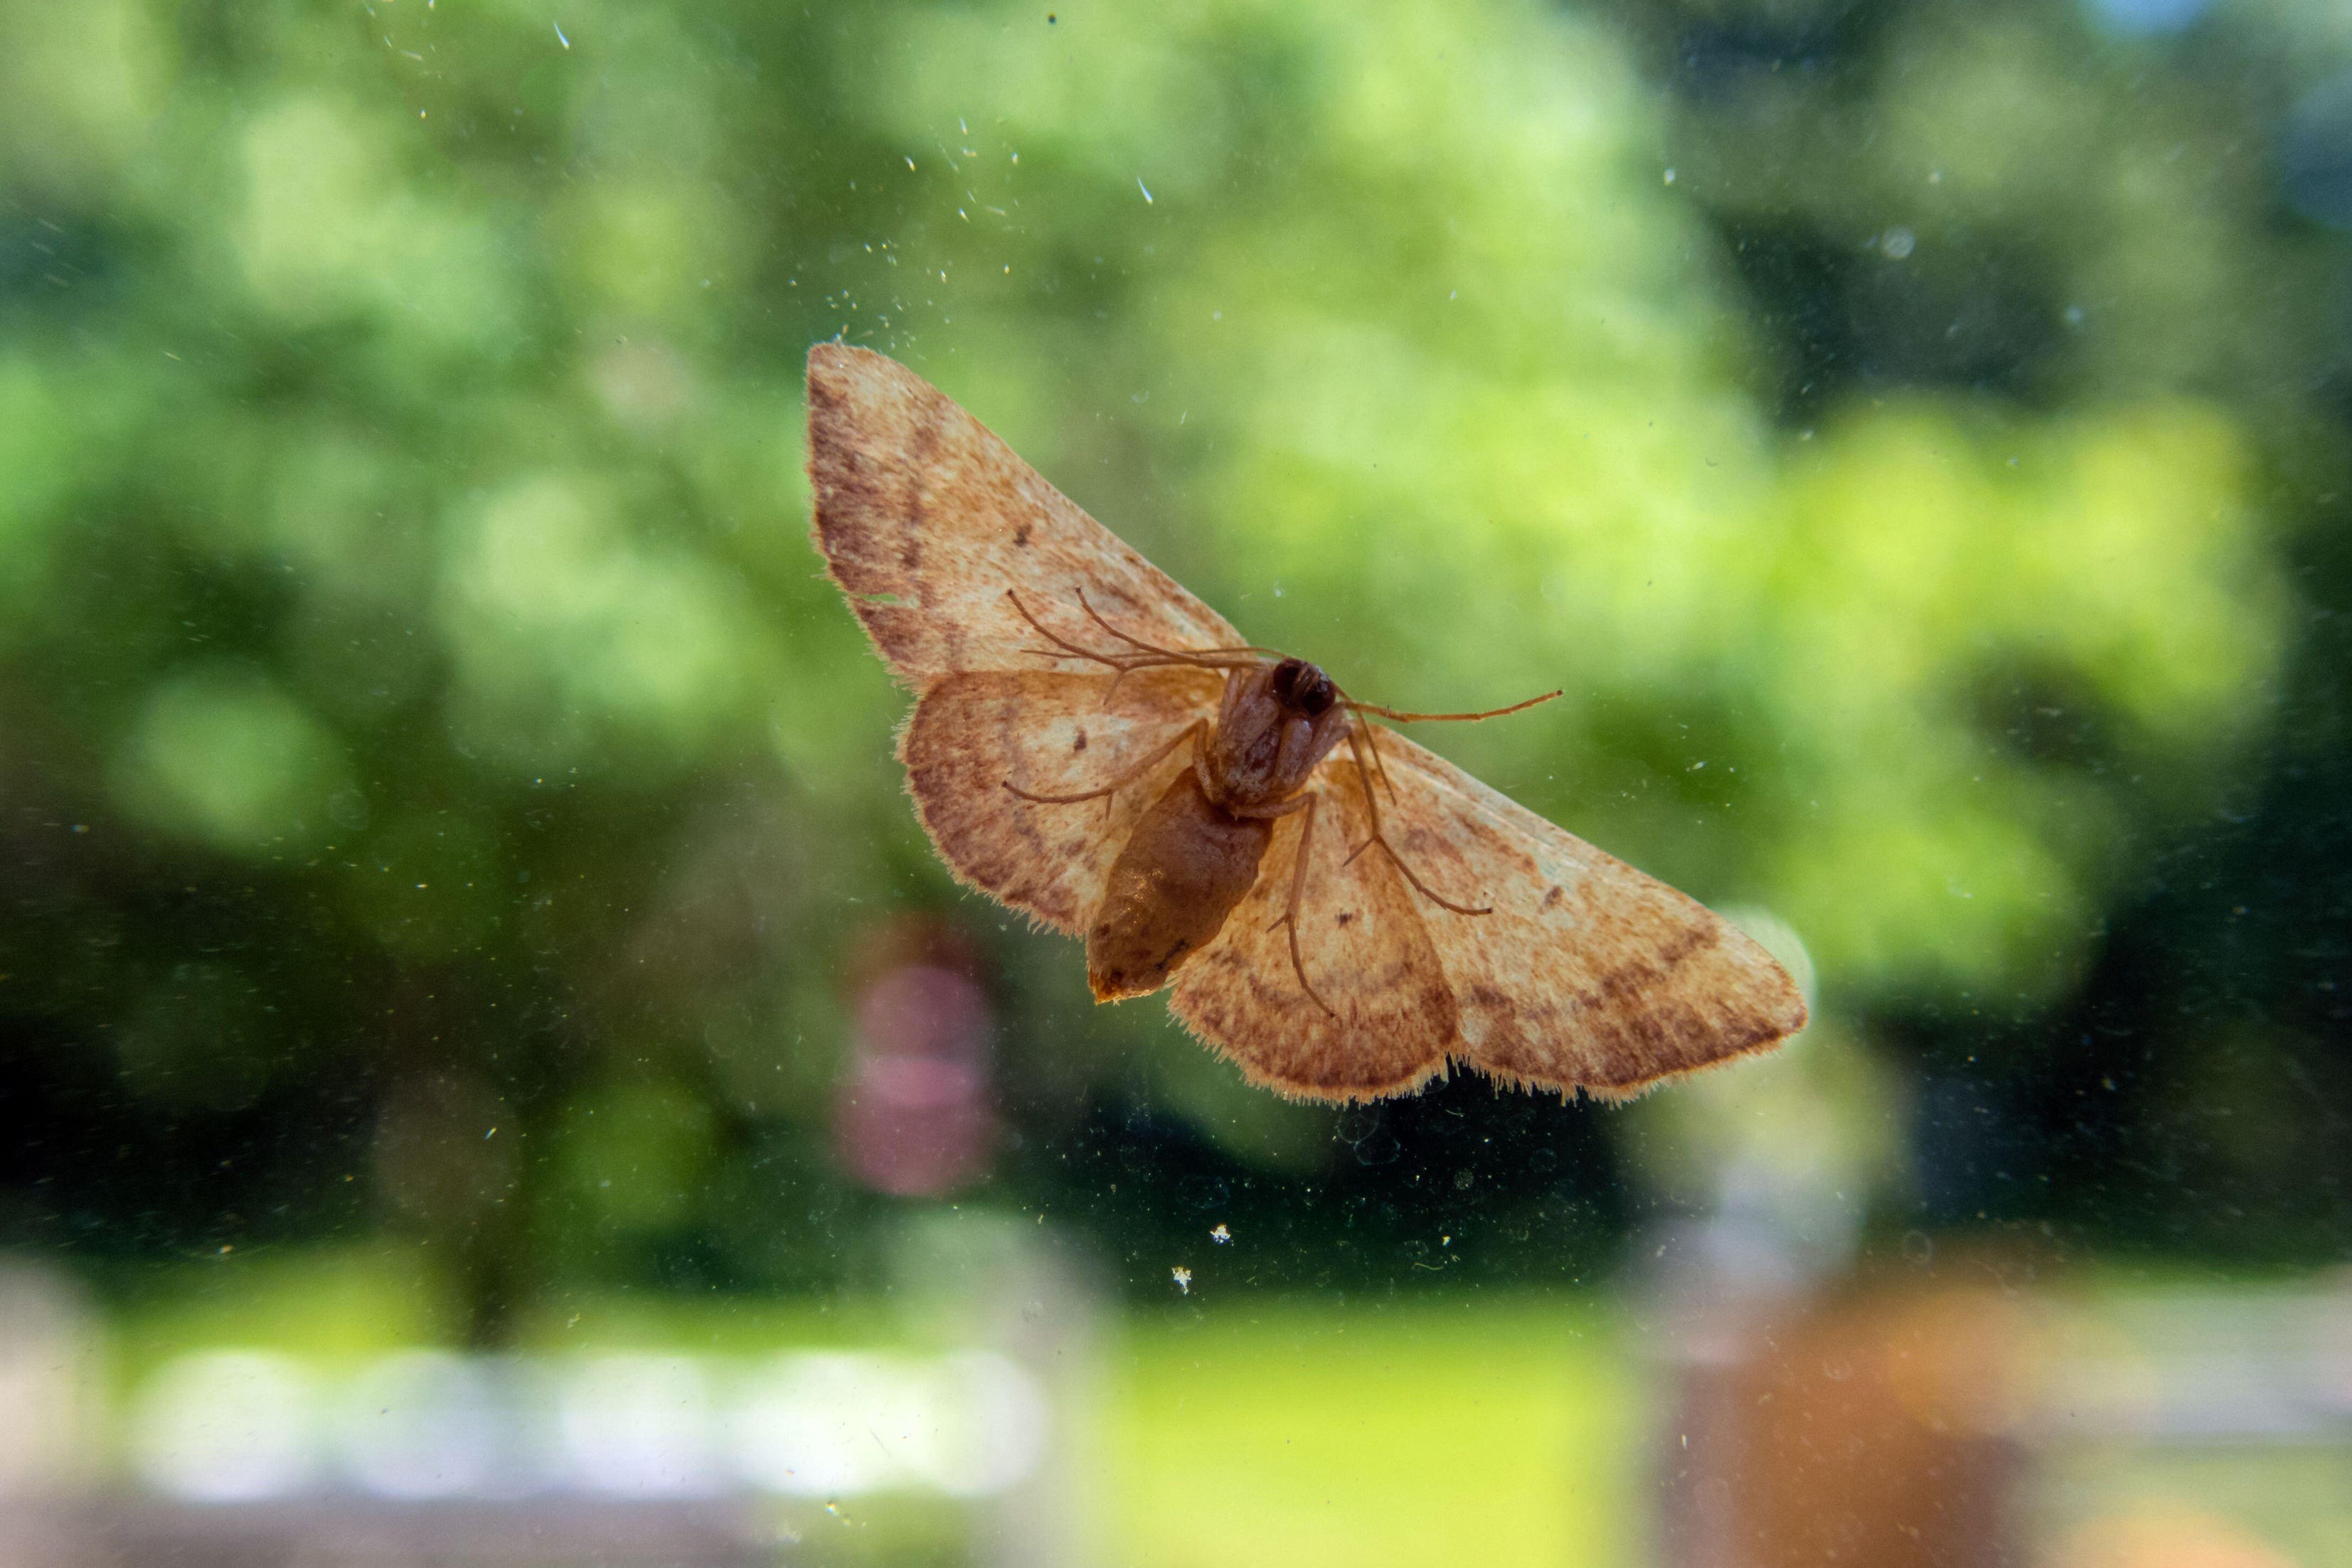 Common Clothes Moth Guide: How to Identify and Get Rid of These Pesky 